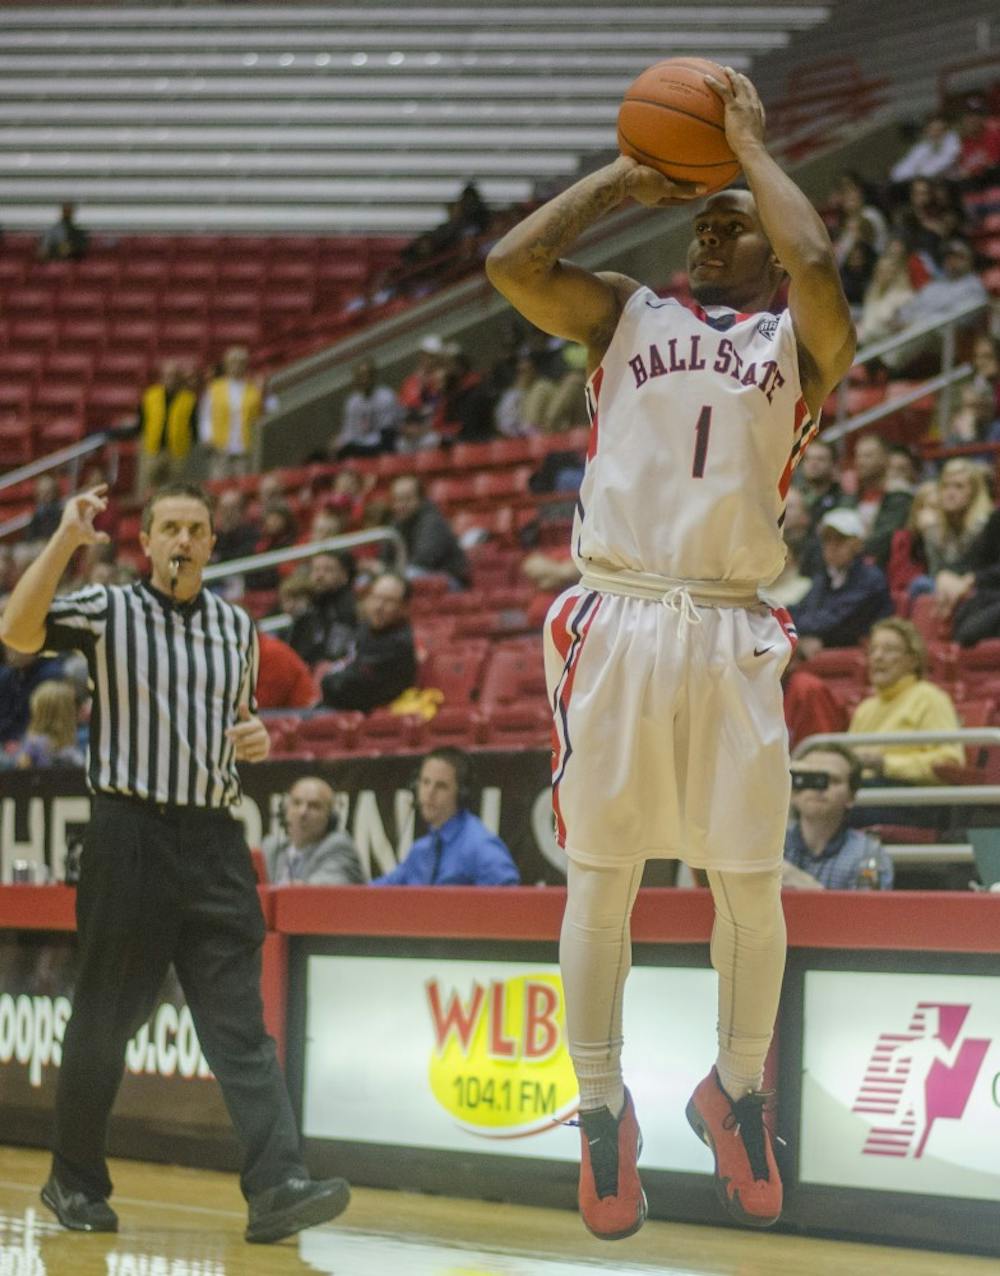 Sophomore guard Zavier Turner goes up for a shot behind the arc during the game against IU Kokomo on Nov. 17 at Worthen Arena. DN PHOTO BREANNA DAUGHERTY